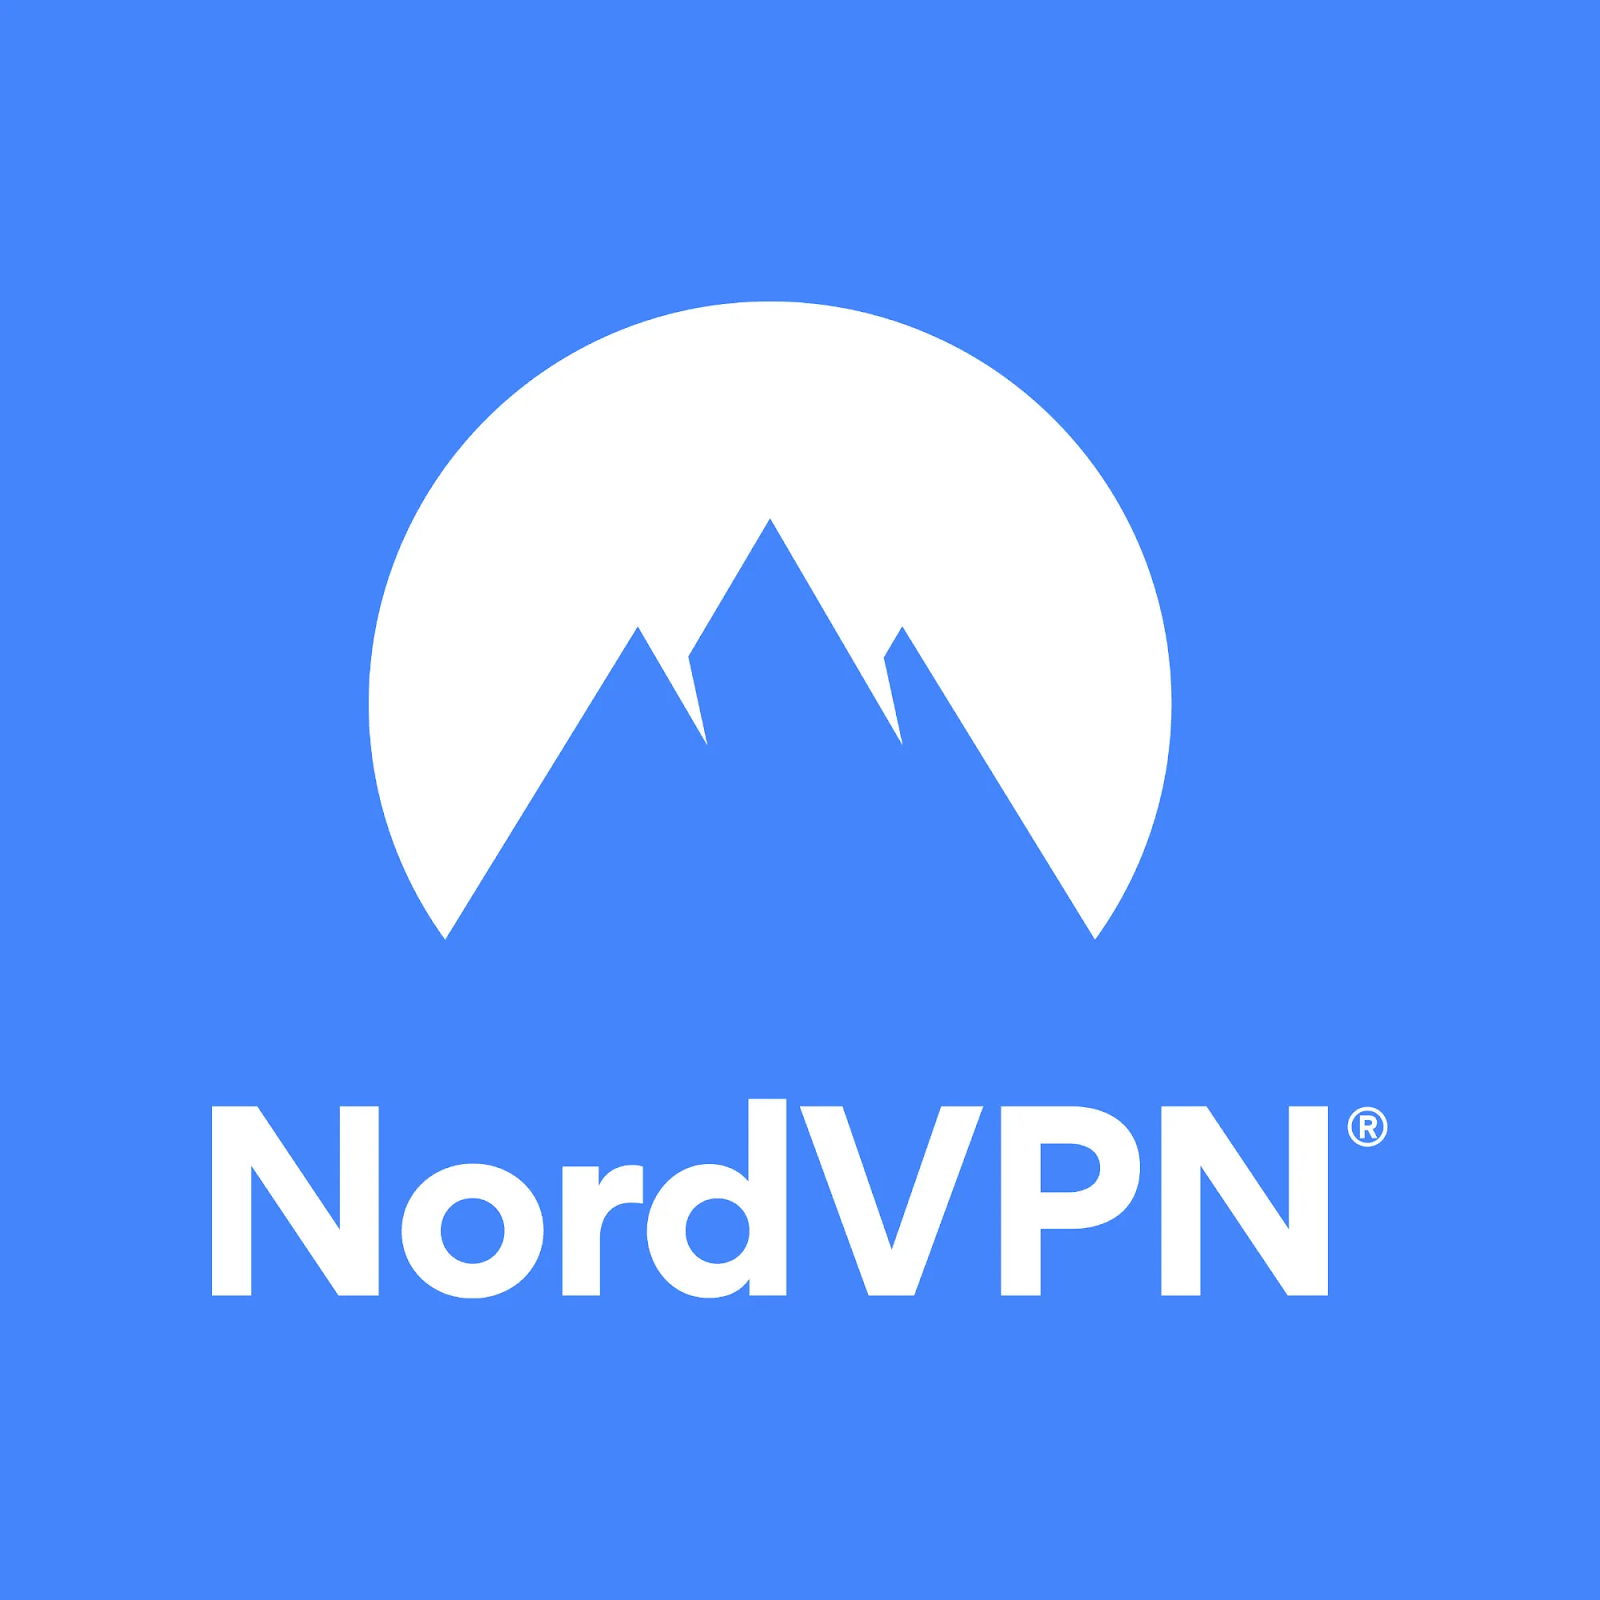 How to use NordVPN on different devices and platforms? 